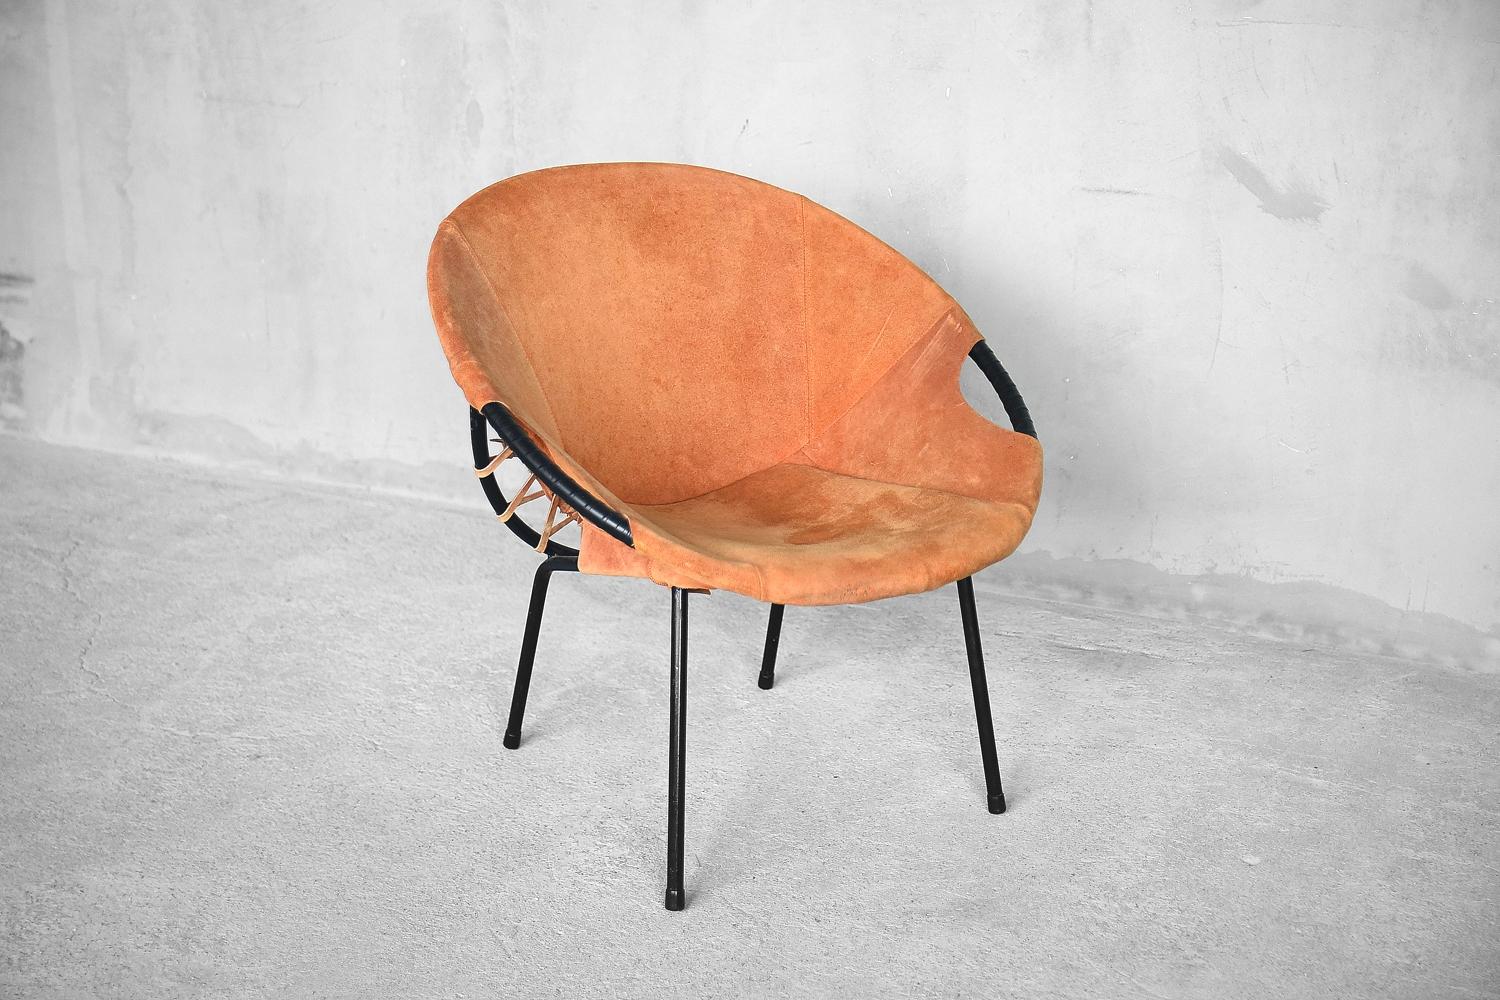 Vintage Mid-Century German Modern Suede Circle Balloon Chair from Lusch & Co For Sale 4